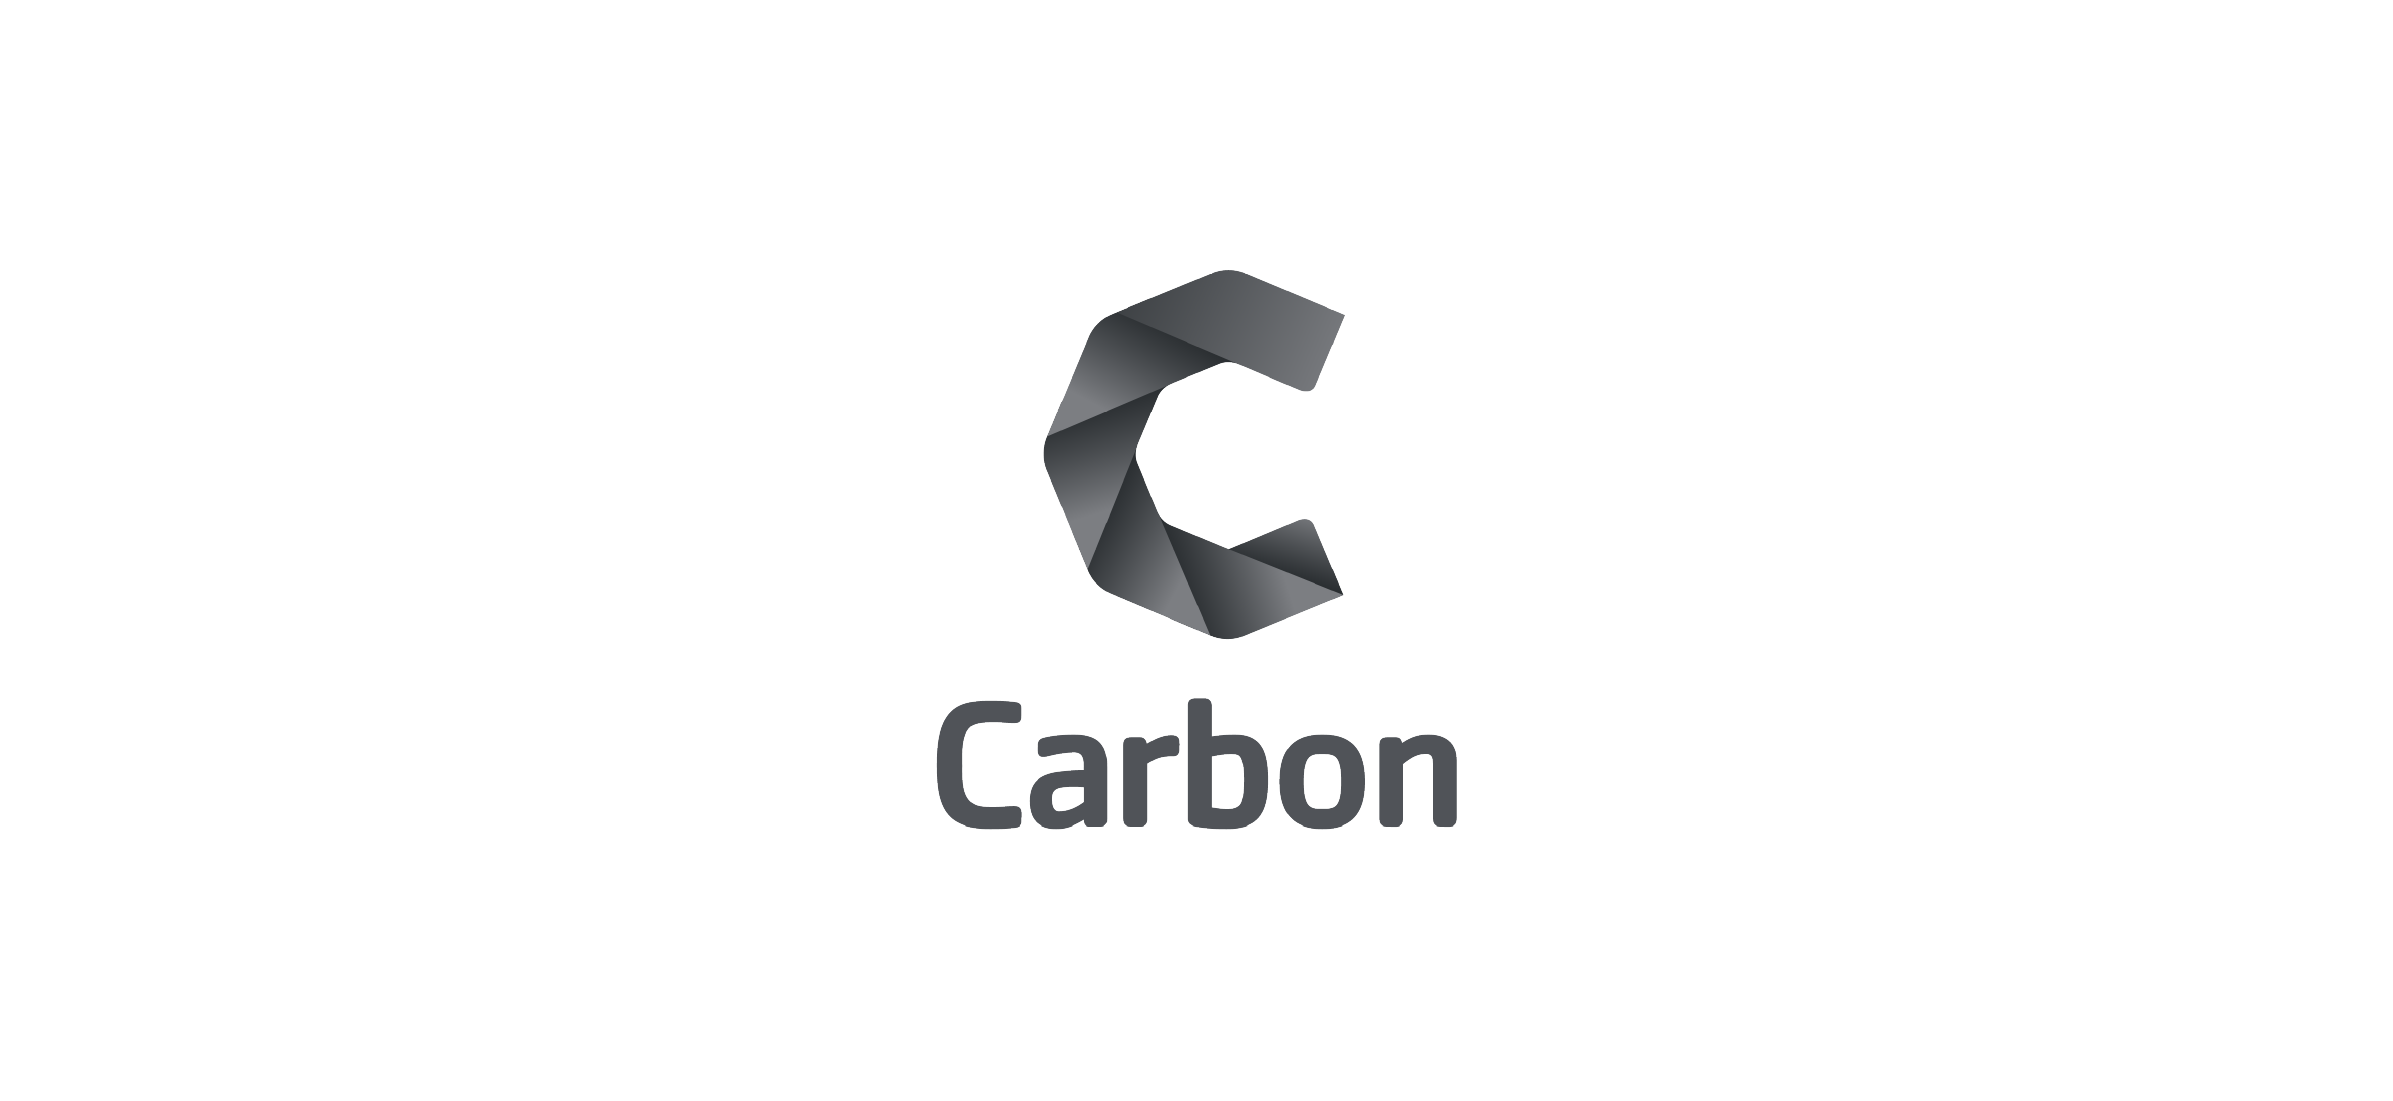 The Carbon Business Systems logo